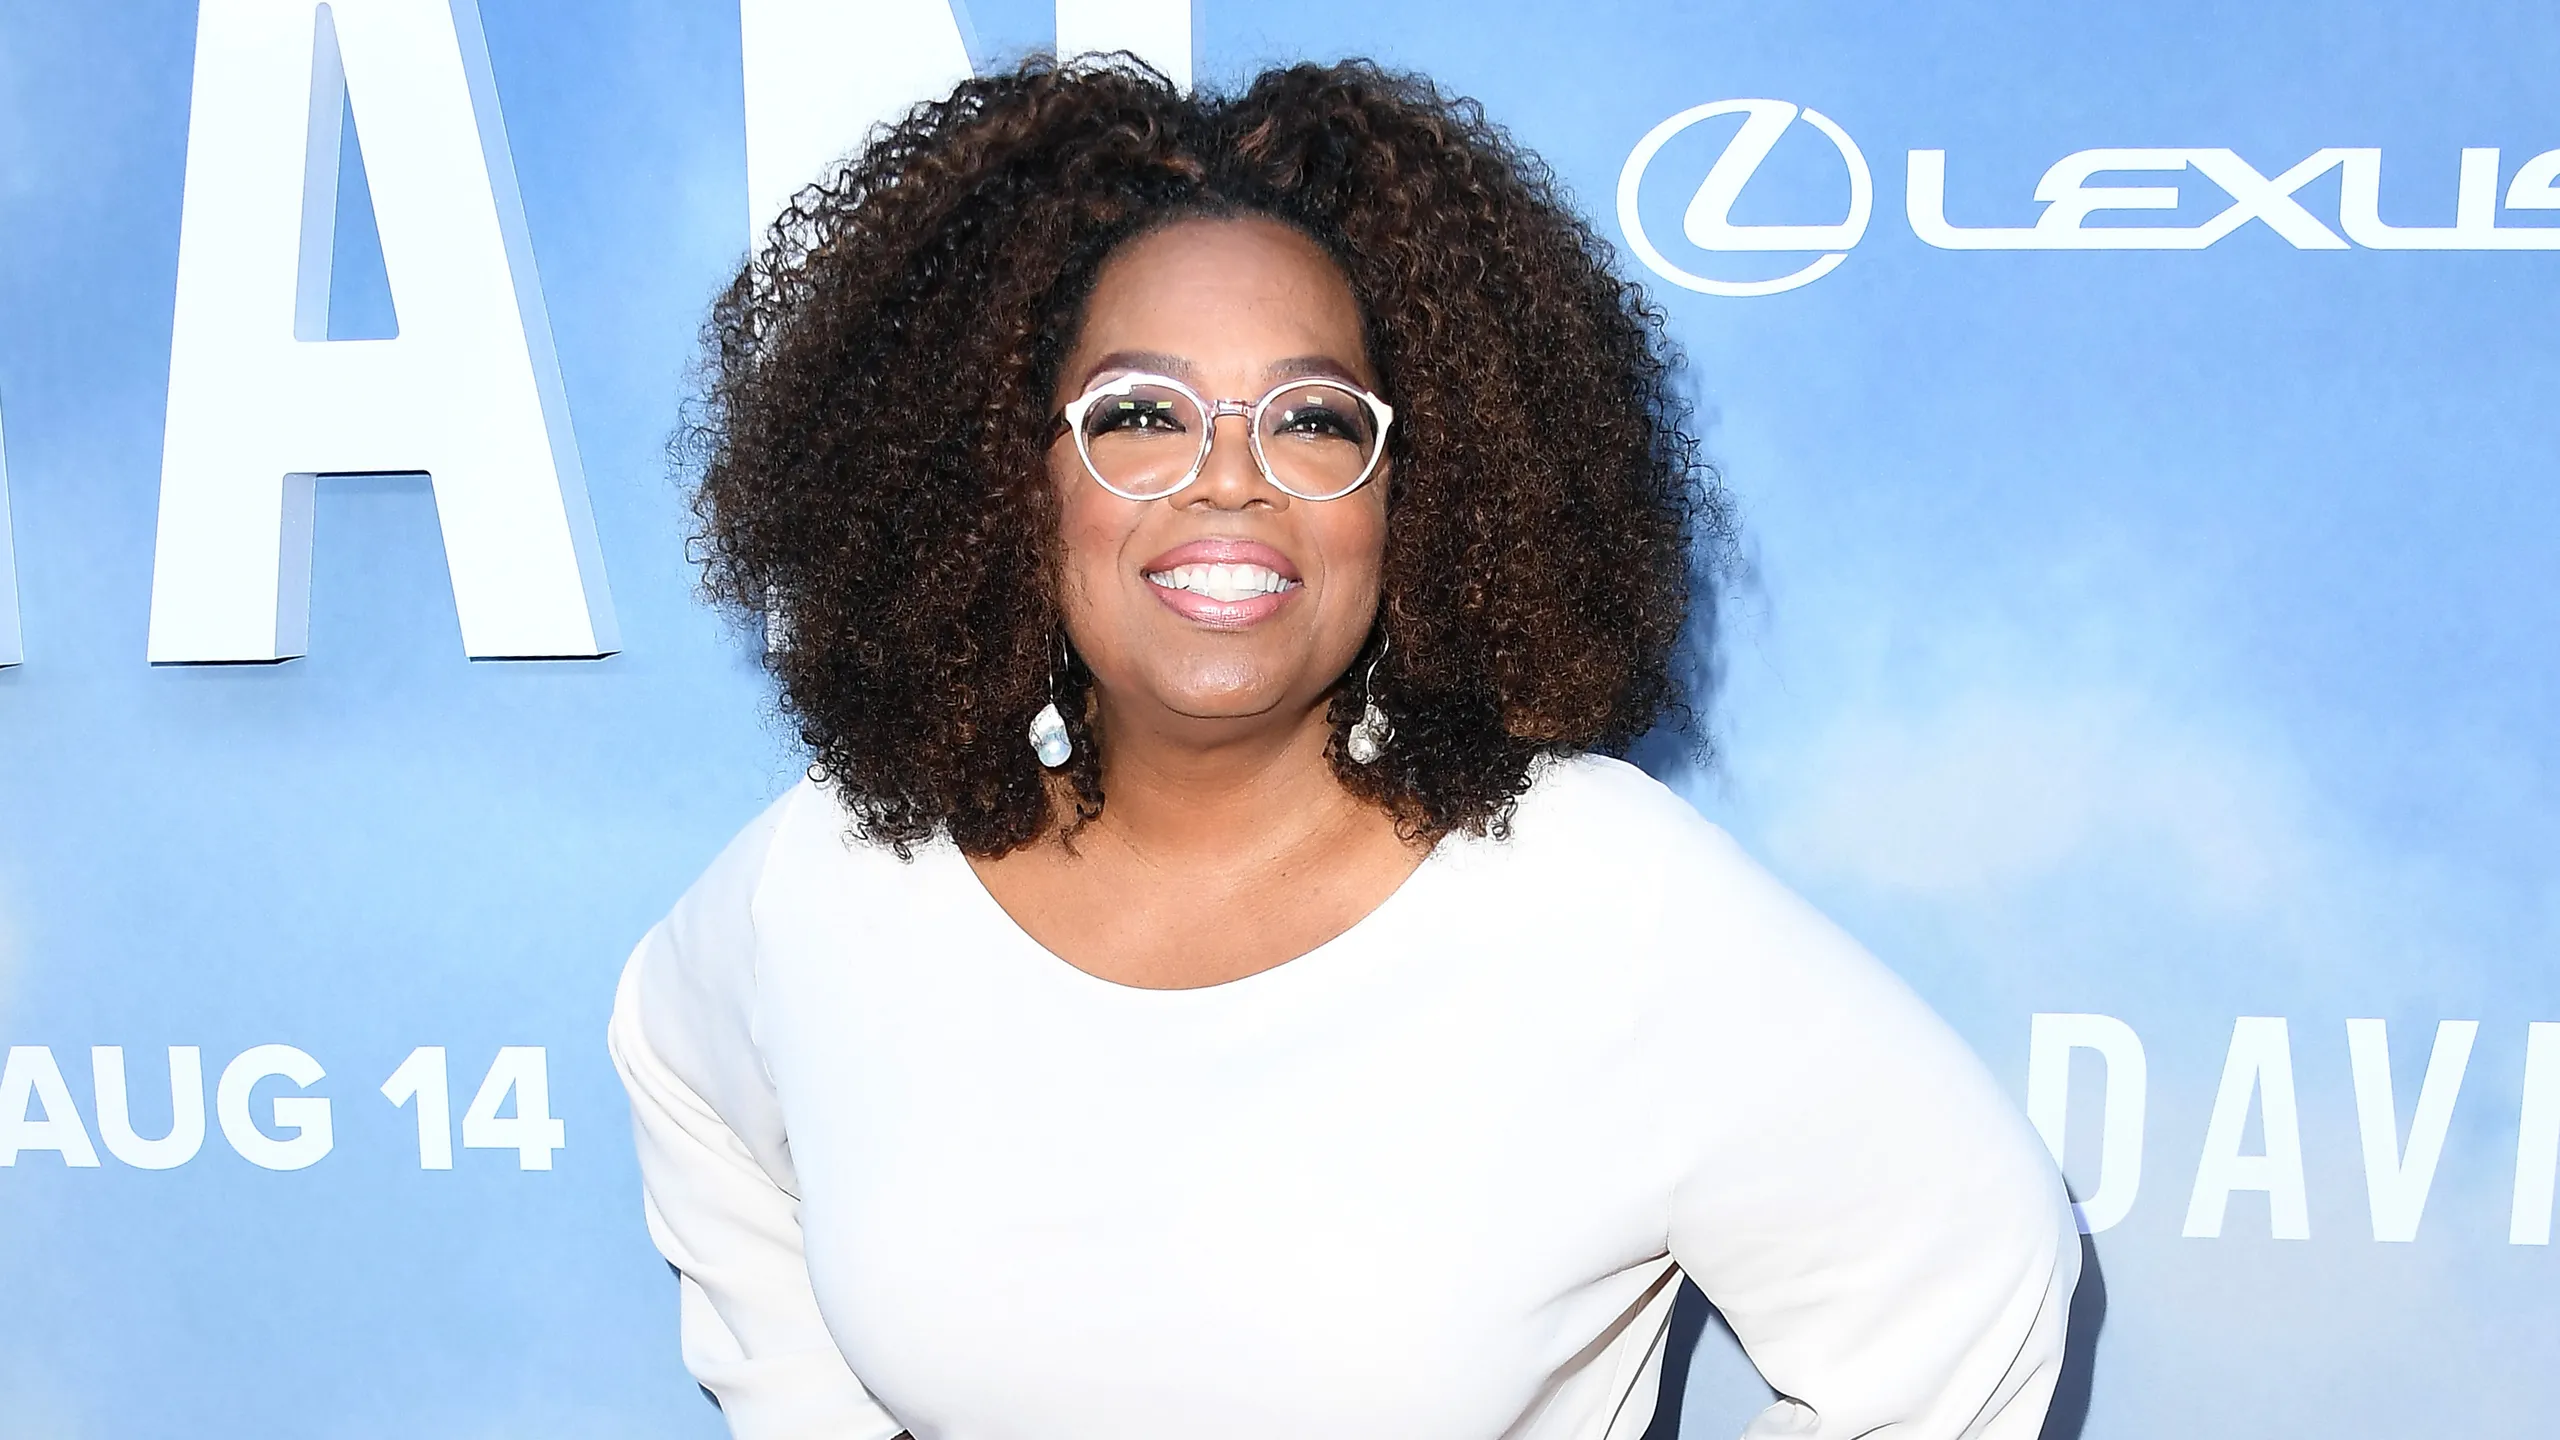 Despite his ongoing illness, Oprah Winfrey surprises her father Vernon with an appreciation day